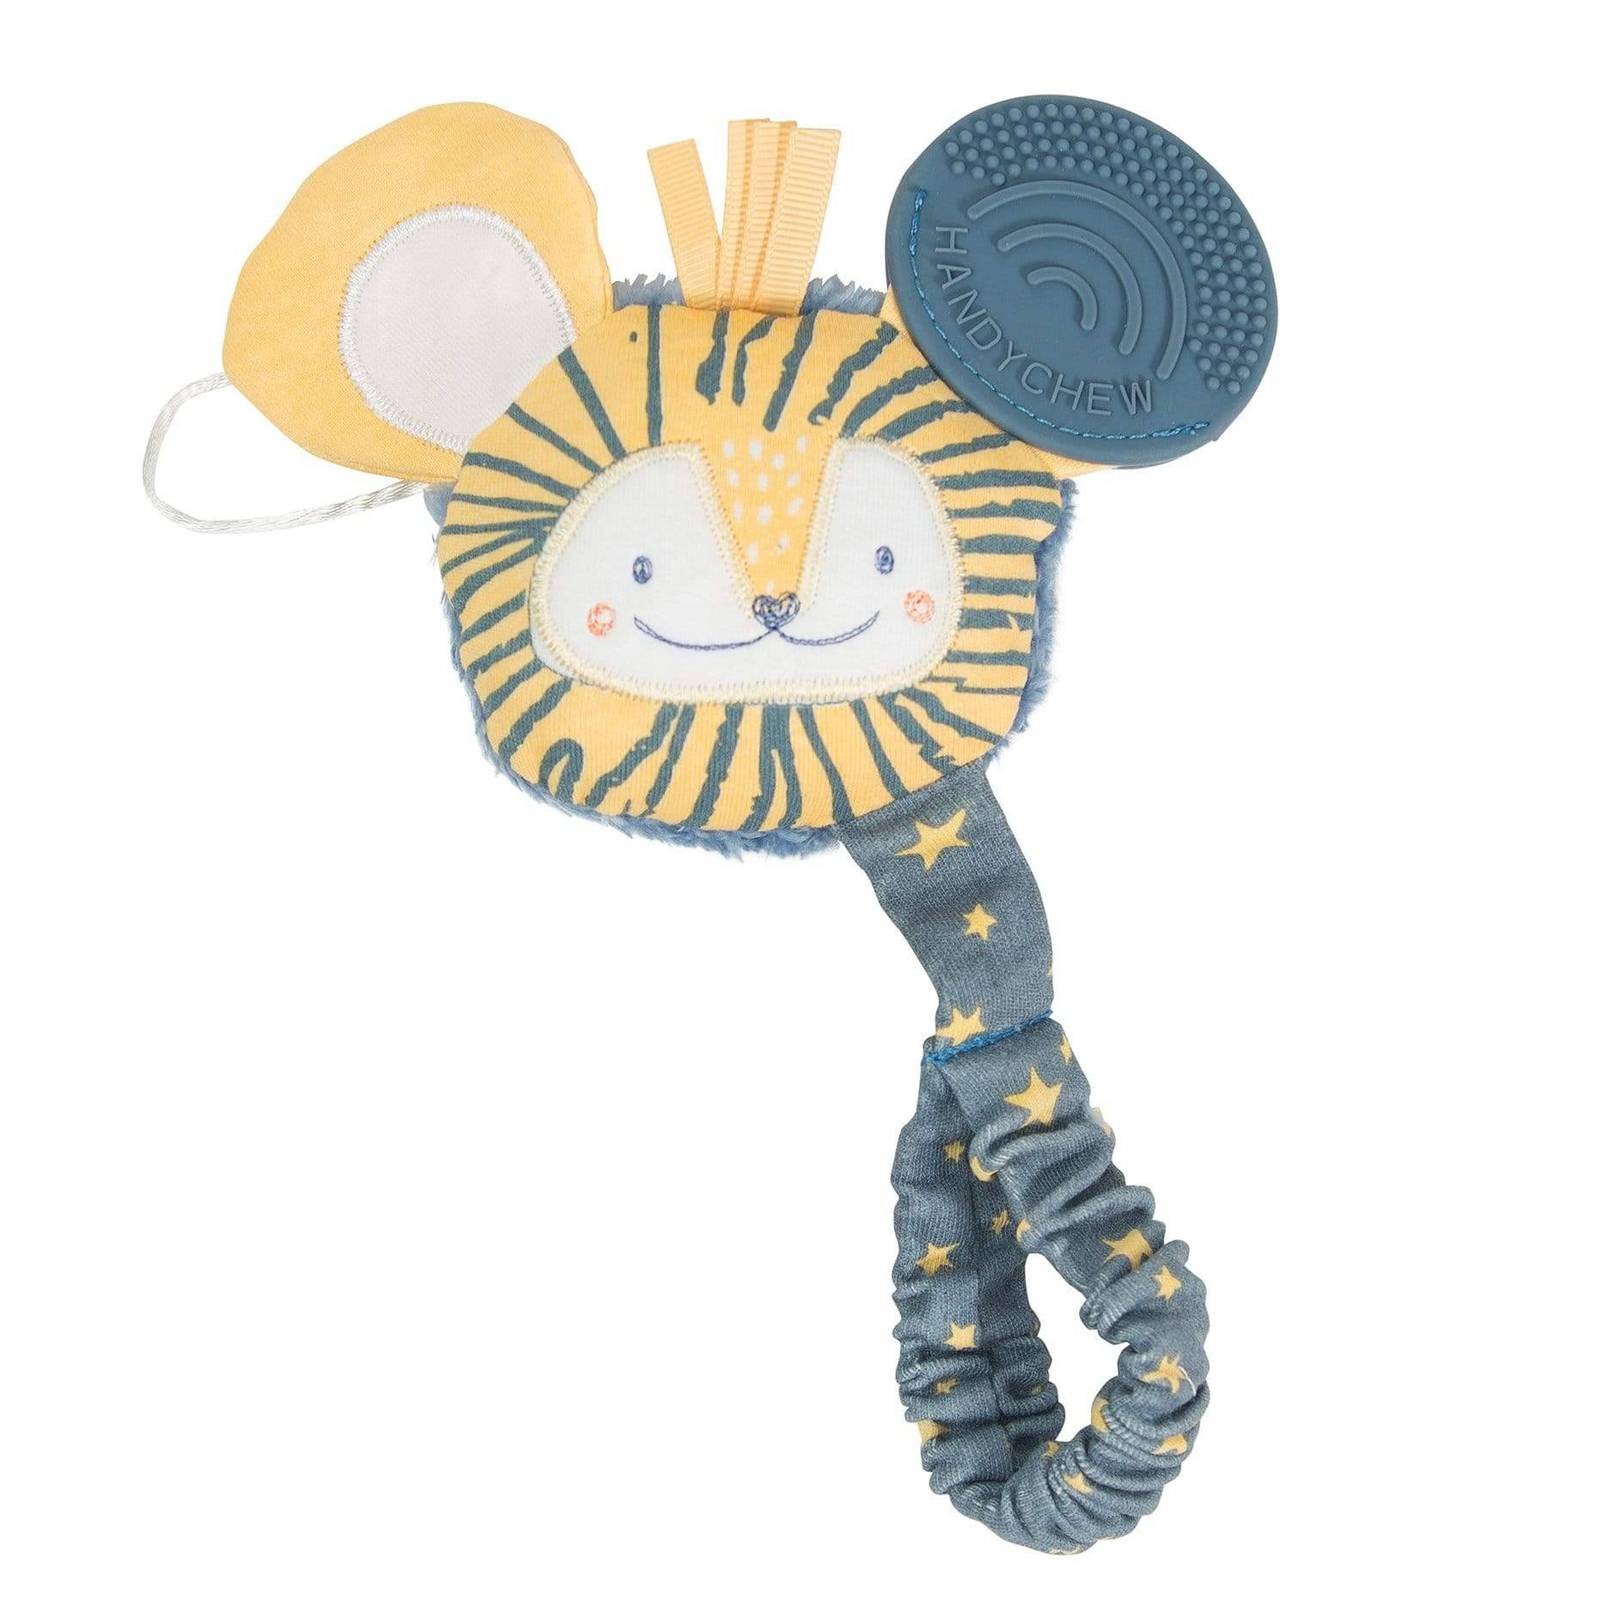 Baby teether in yellow and blue soft lion design.